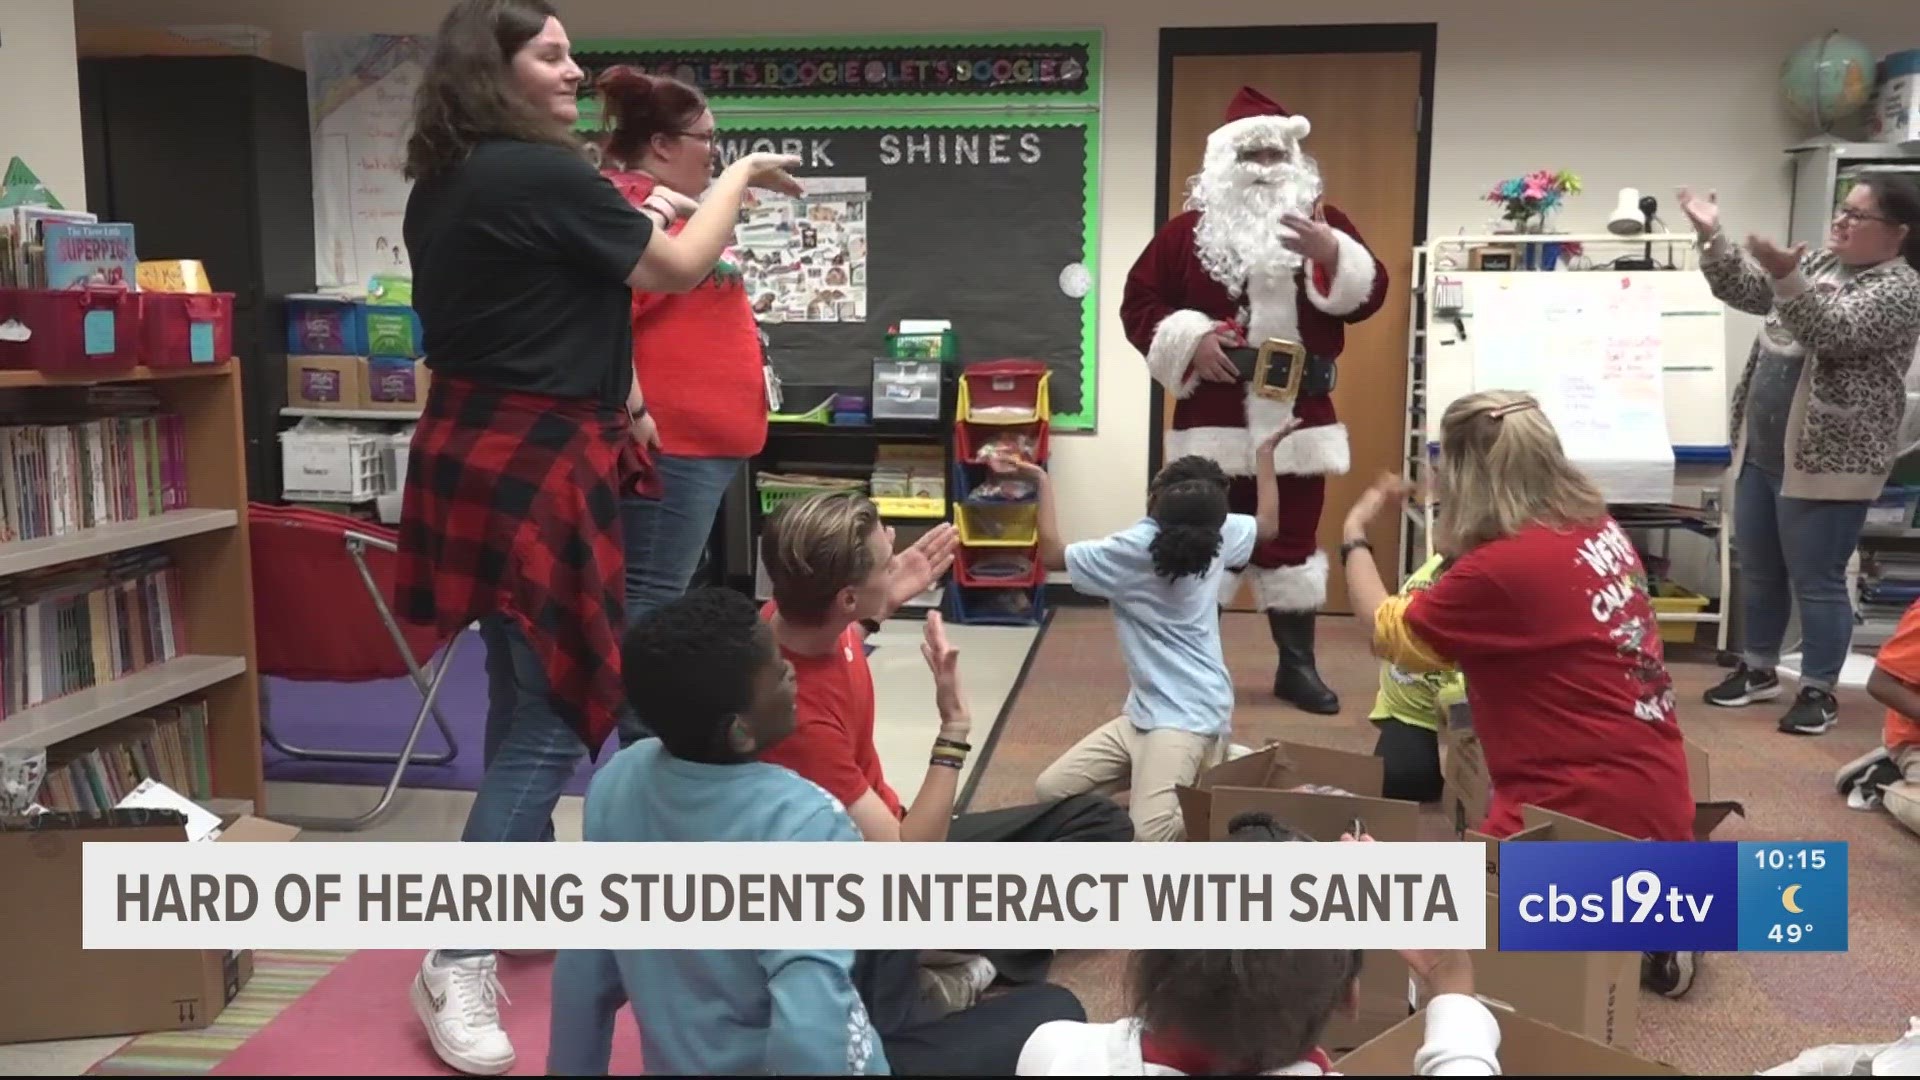 Students were able to tell Santa Claus what they would like for Christmas through Sign Language.